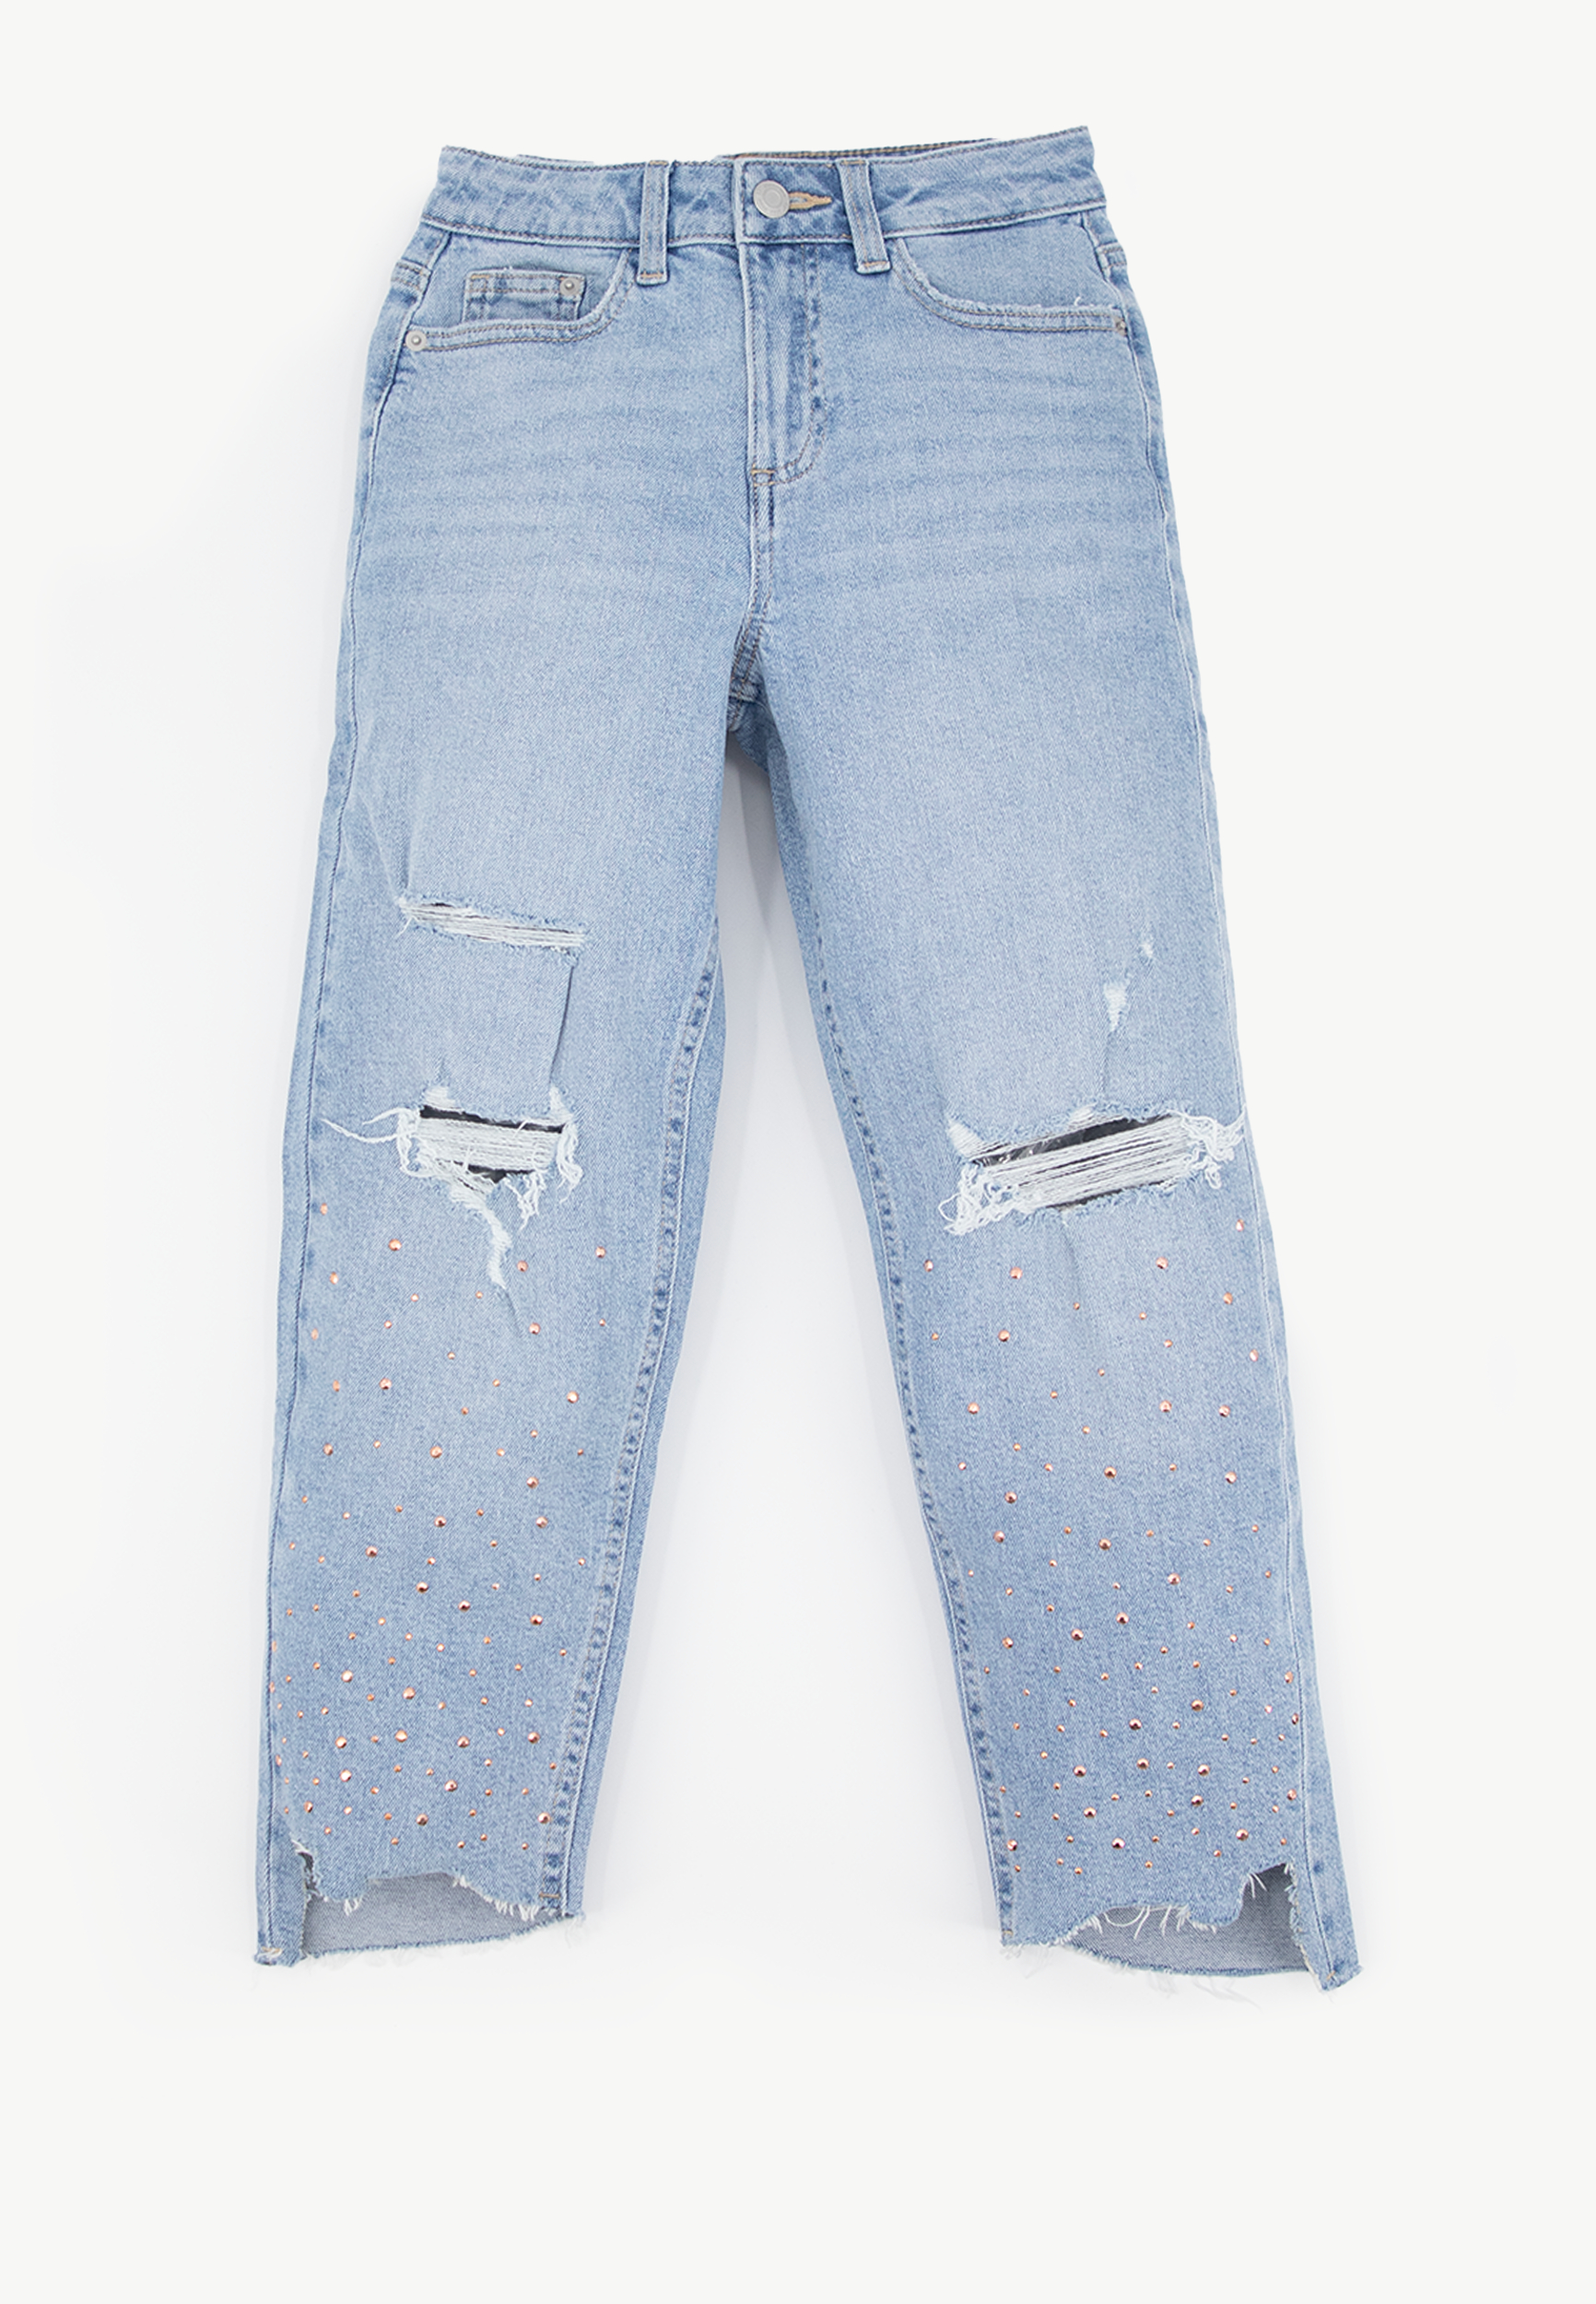 Girls Jeans, Ages 8-12